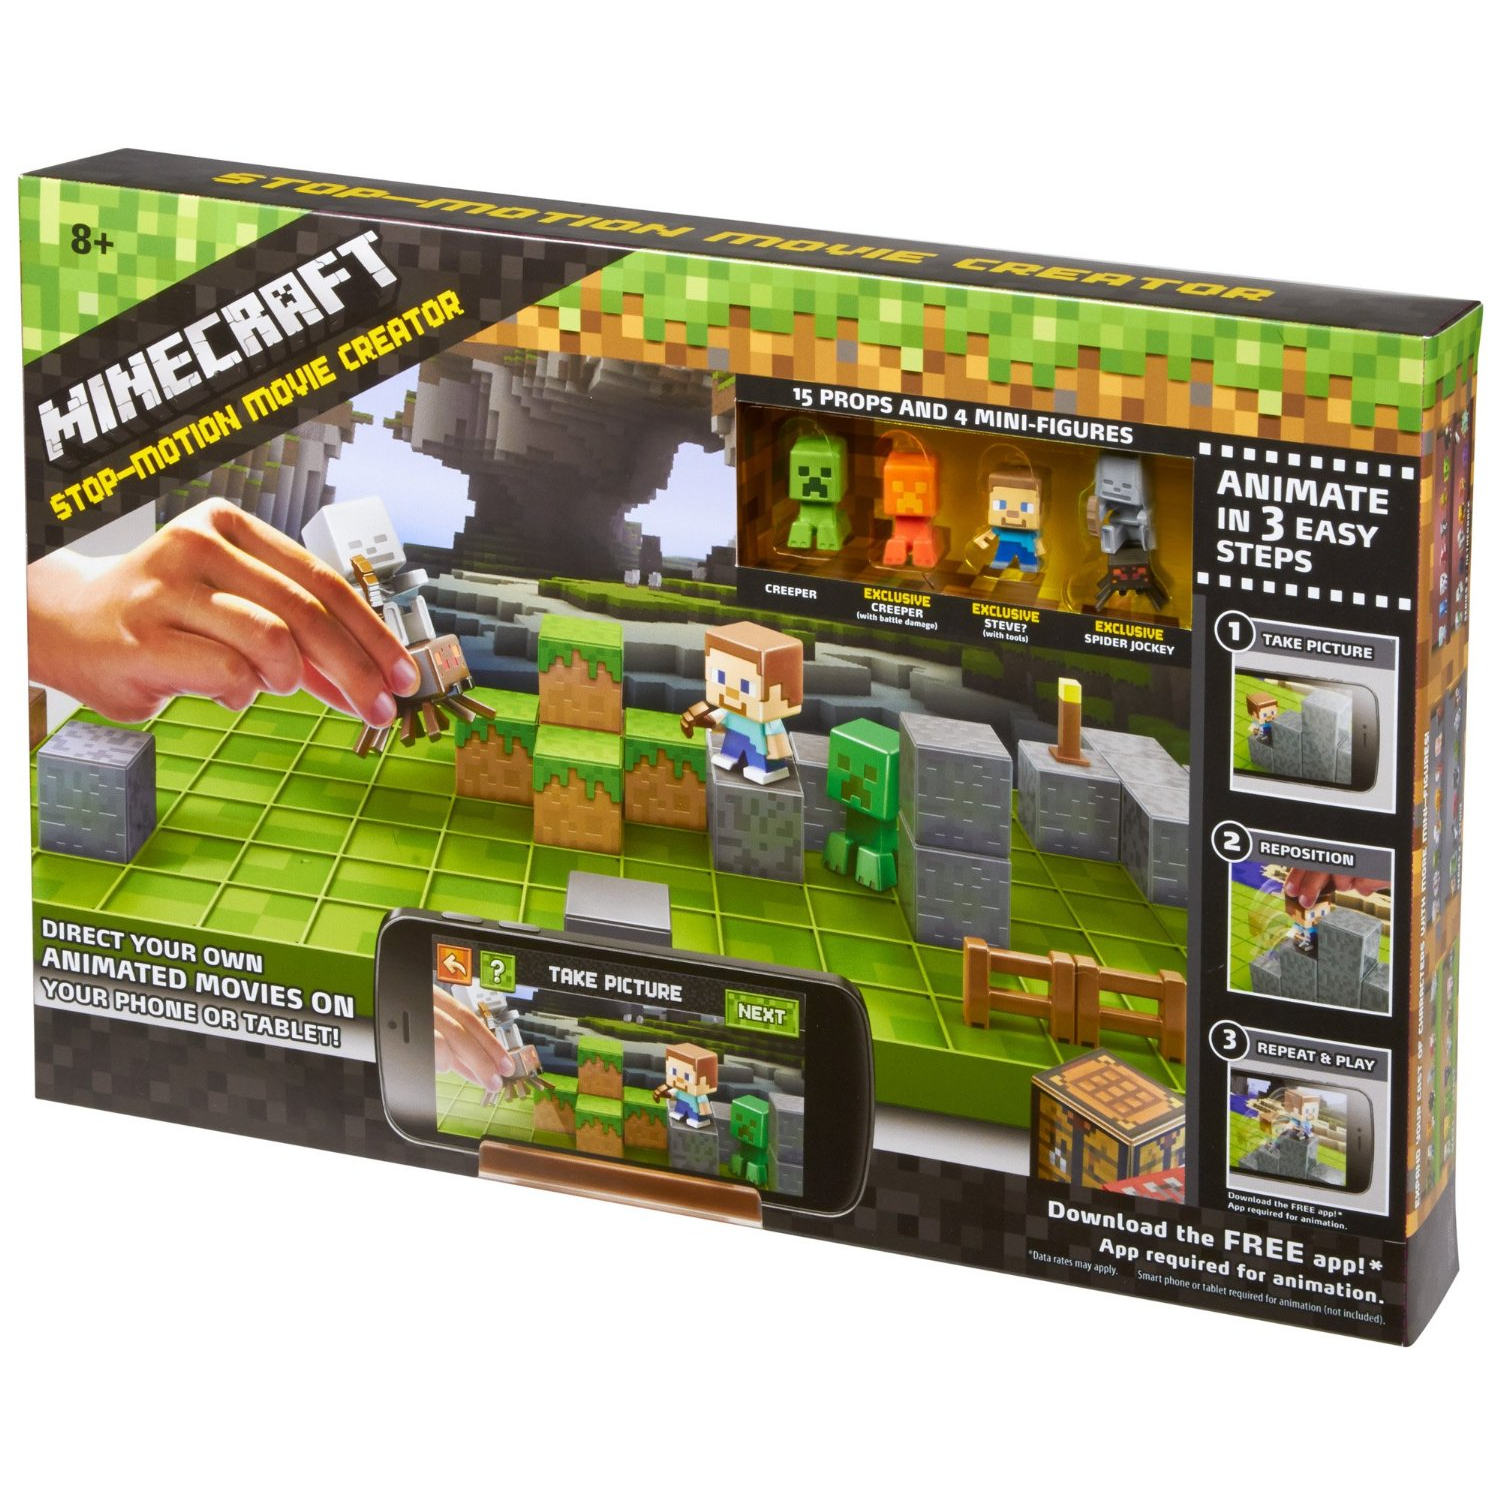 Minecraft Stop-Motion Animation Studio Only $19.99!